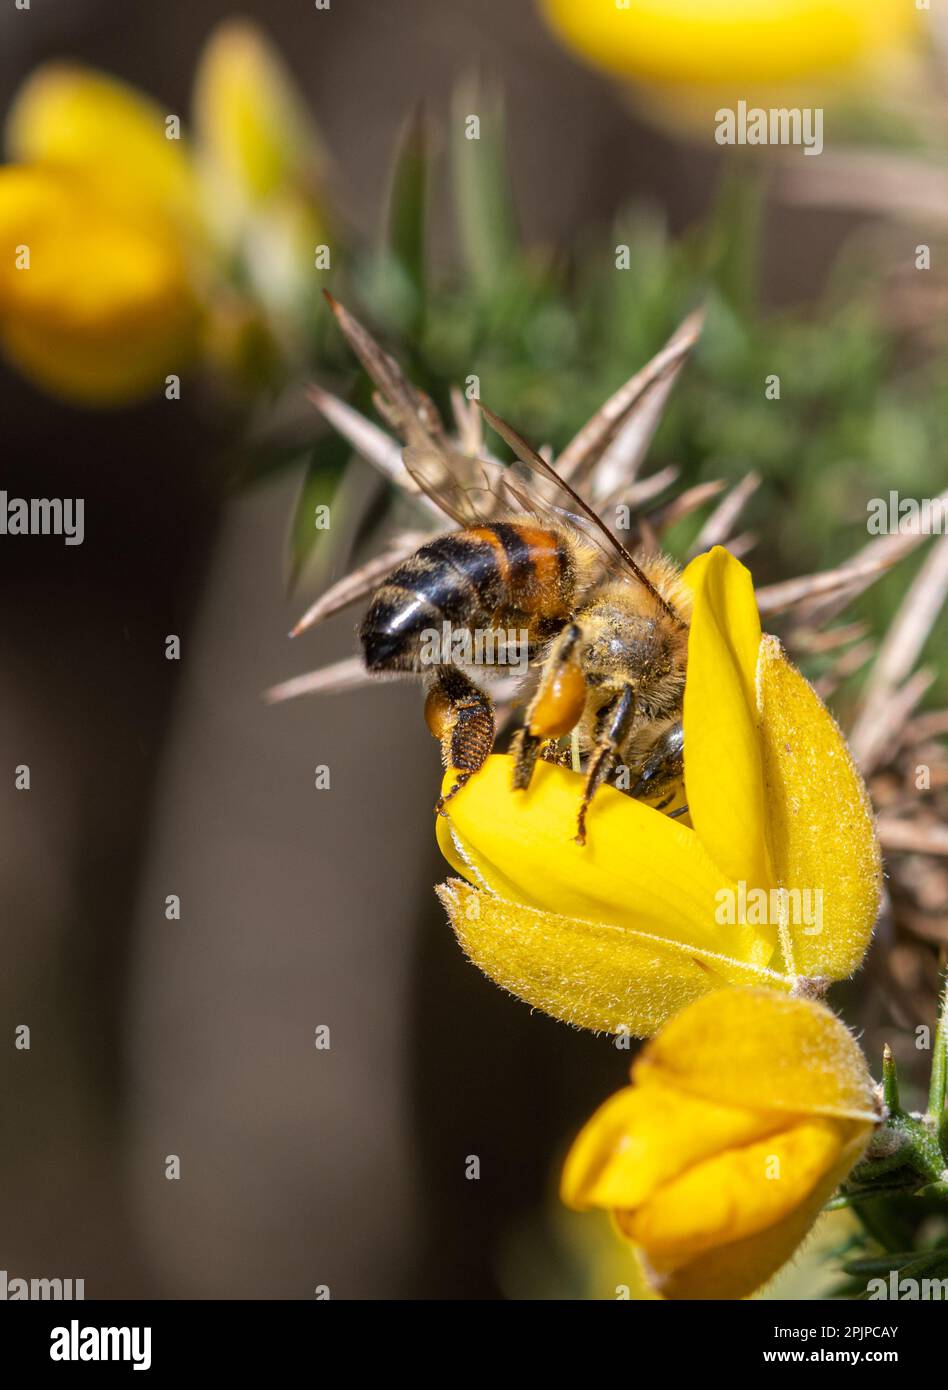 Western honey bee (Apis mellifera, also called European honeybee) collecting nectar and pollen from gorse flowers during Spring, Surrey, England, UK Stock Photo